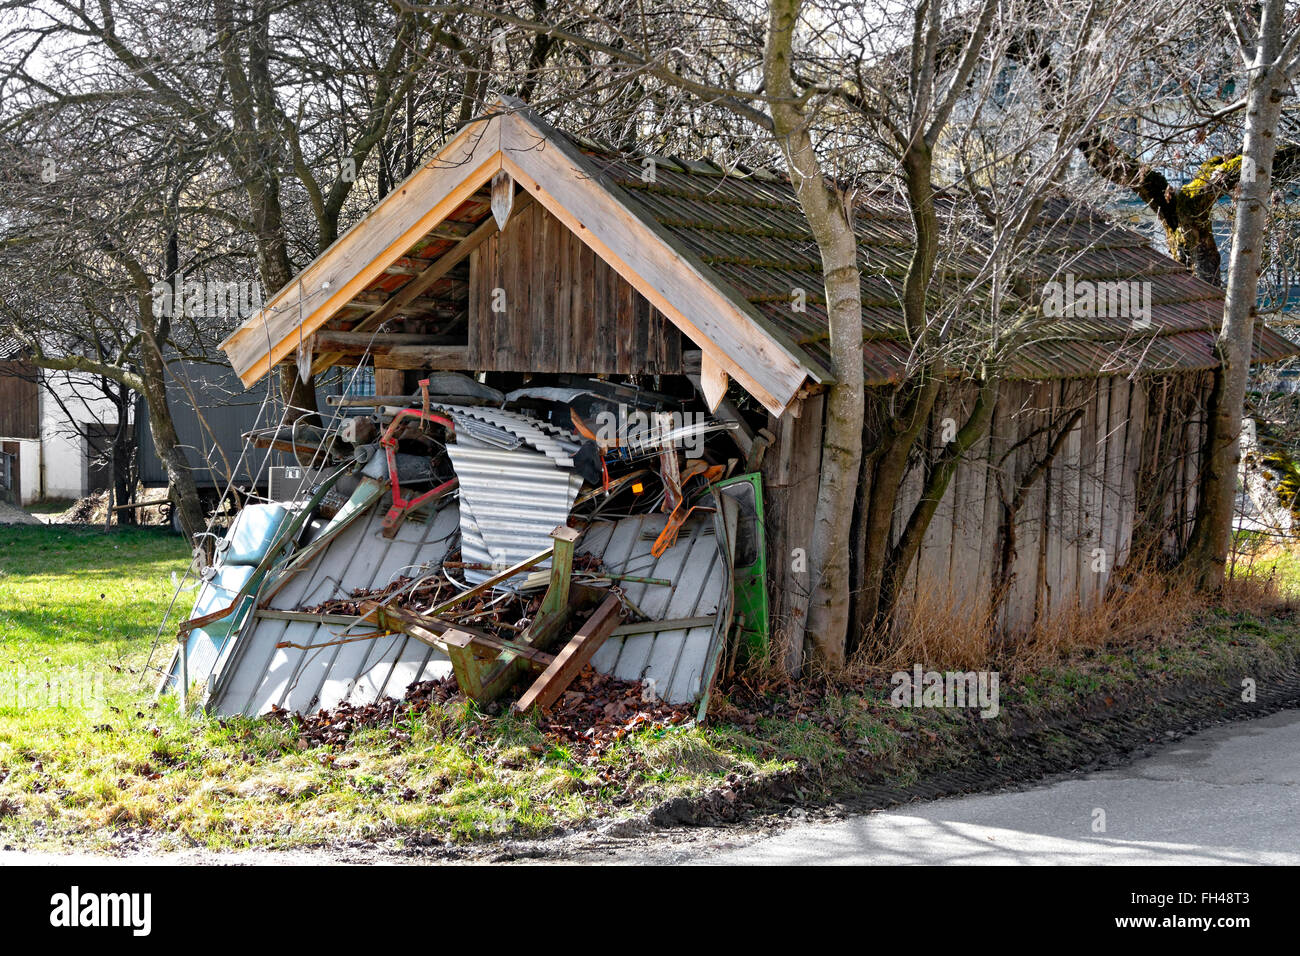 Old wooden shed overflowing with scrap metal, Chiemgau, Upper Bavaria, Germany, Europe Stock Photo